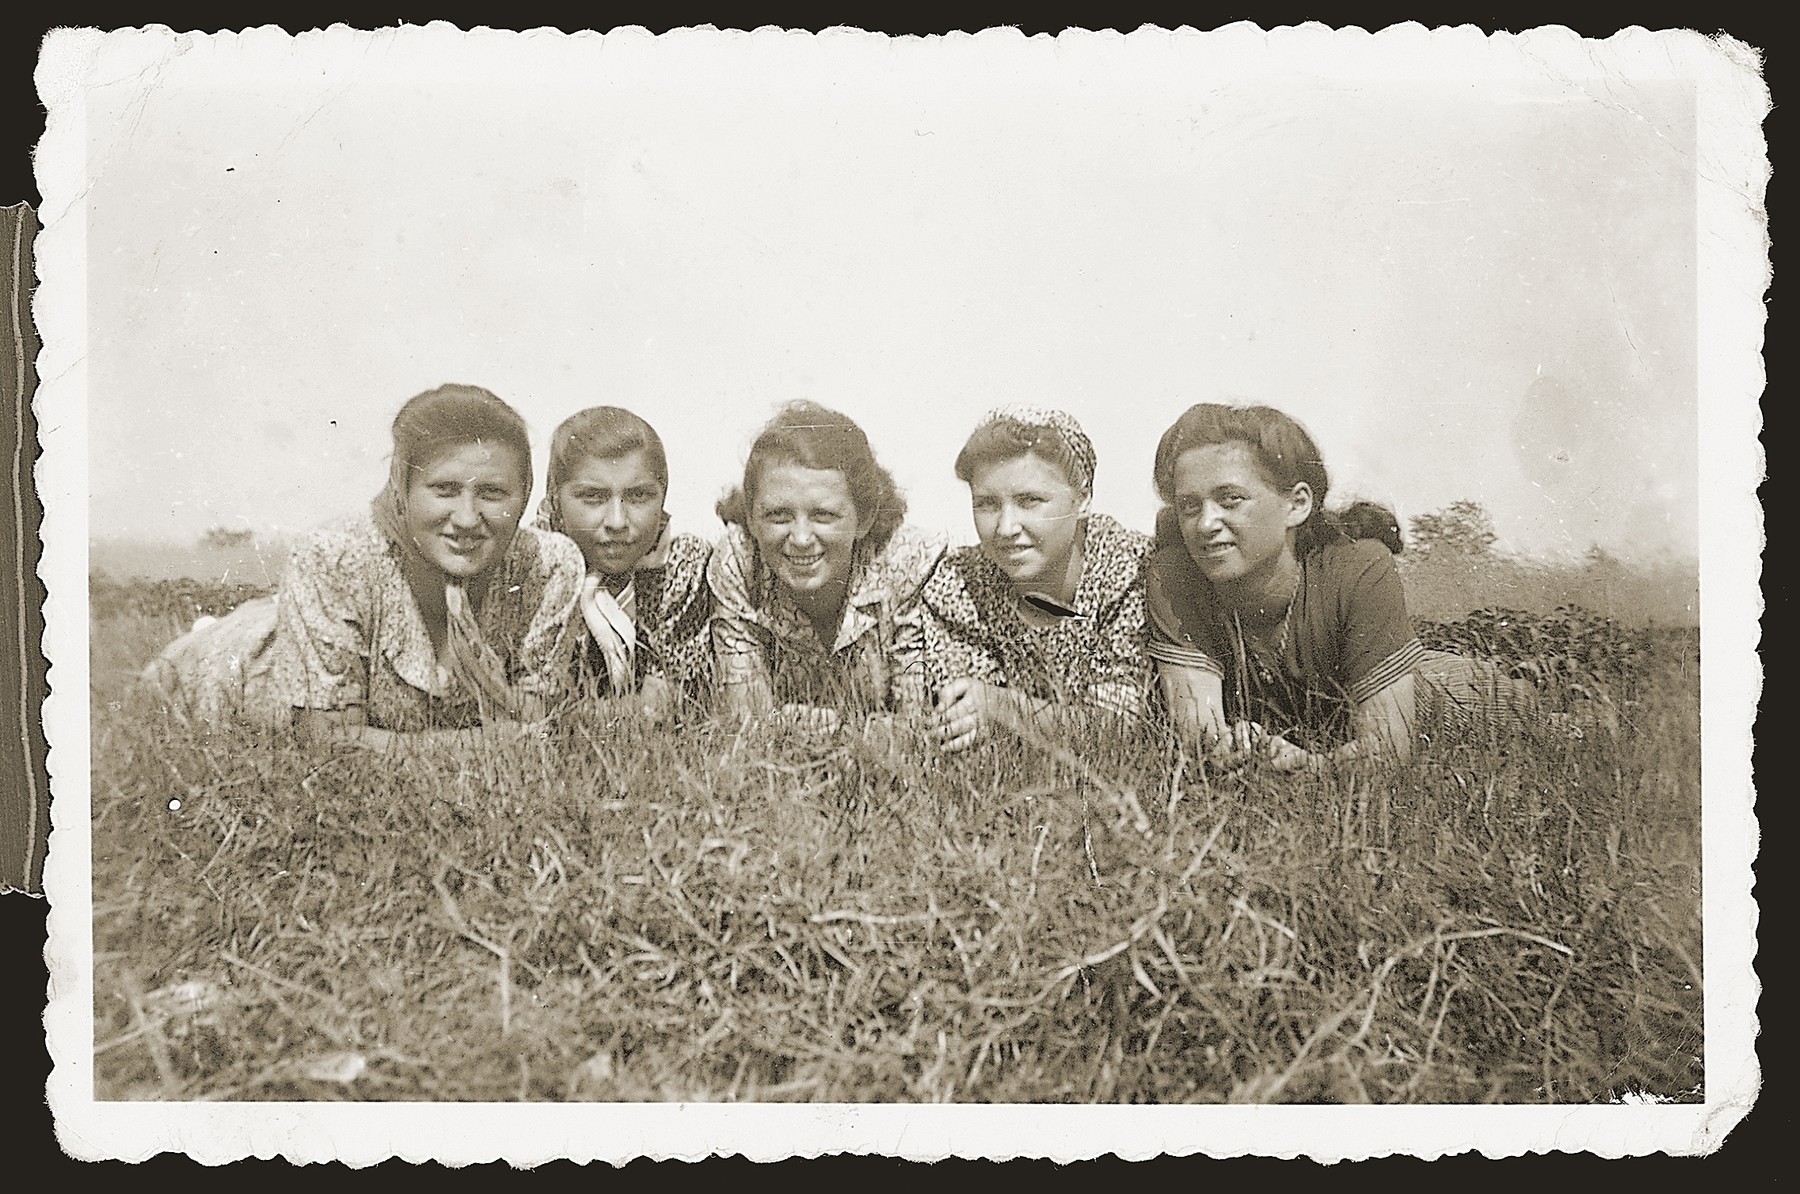 Group portrait of teenage girls in an open field in Czeladz.

Among those pictured are Riwcia (third from left) and Henia Grin (right).